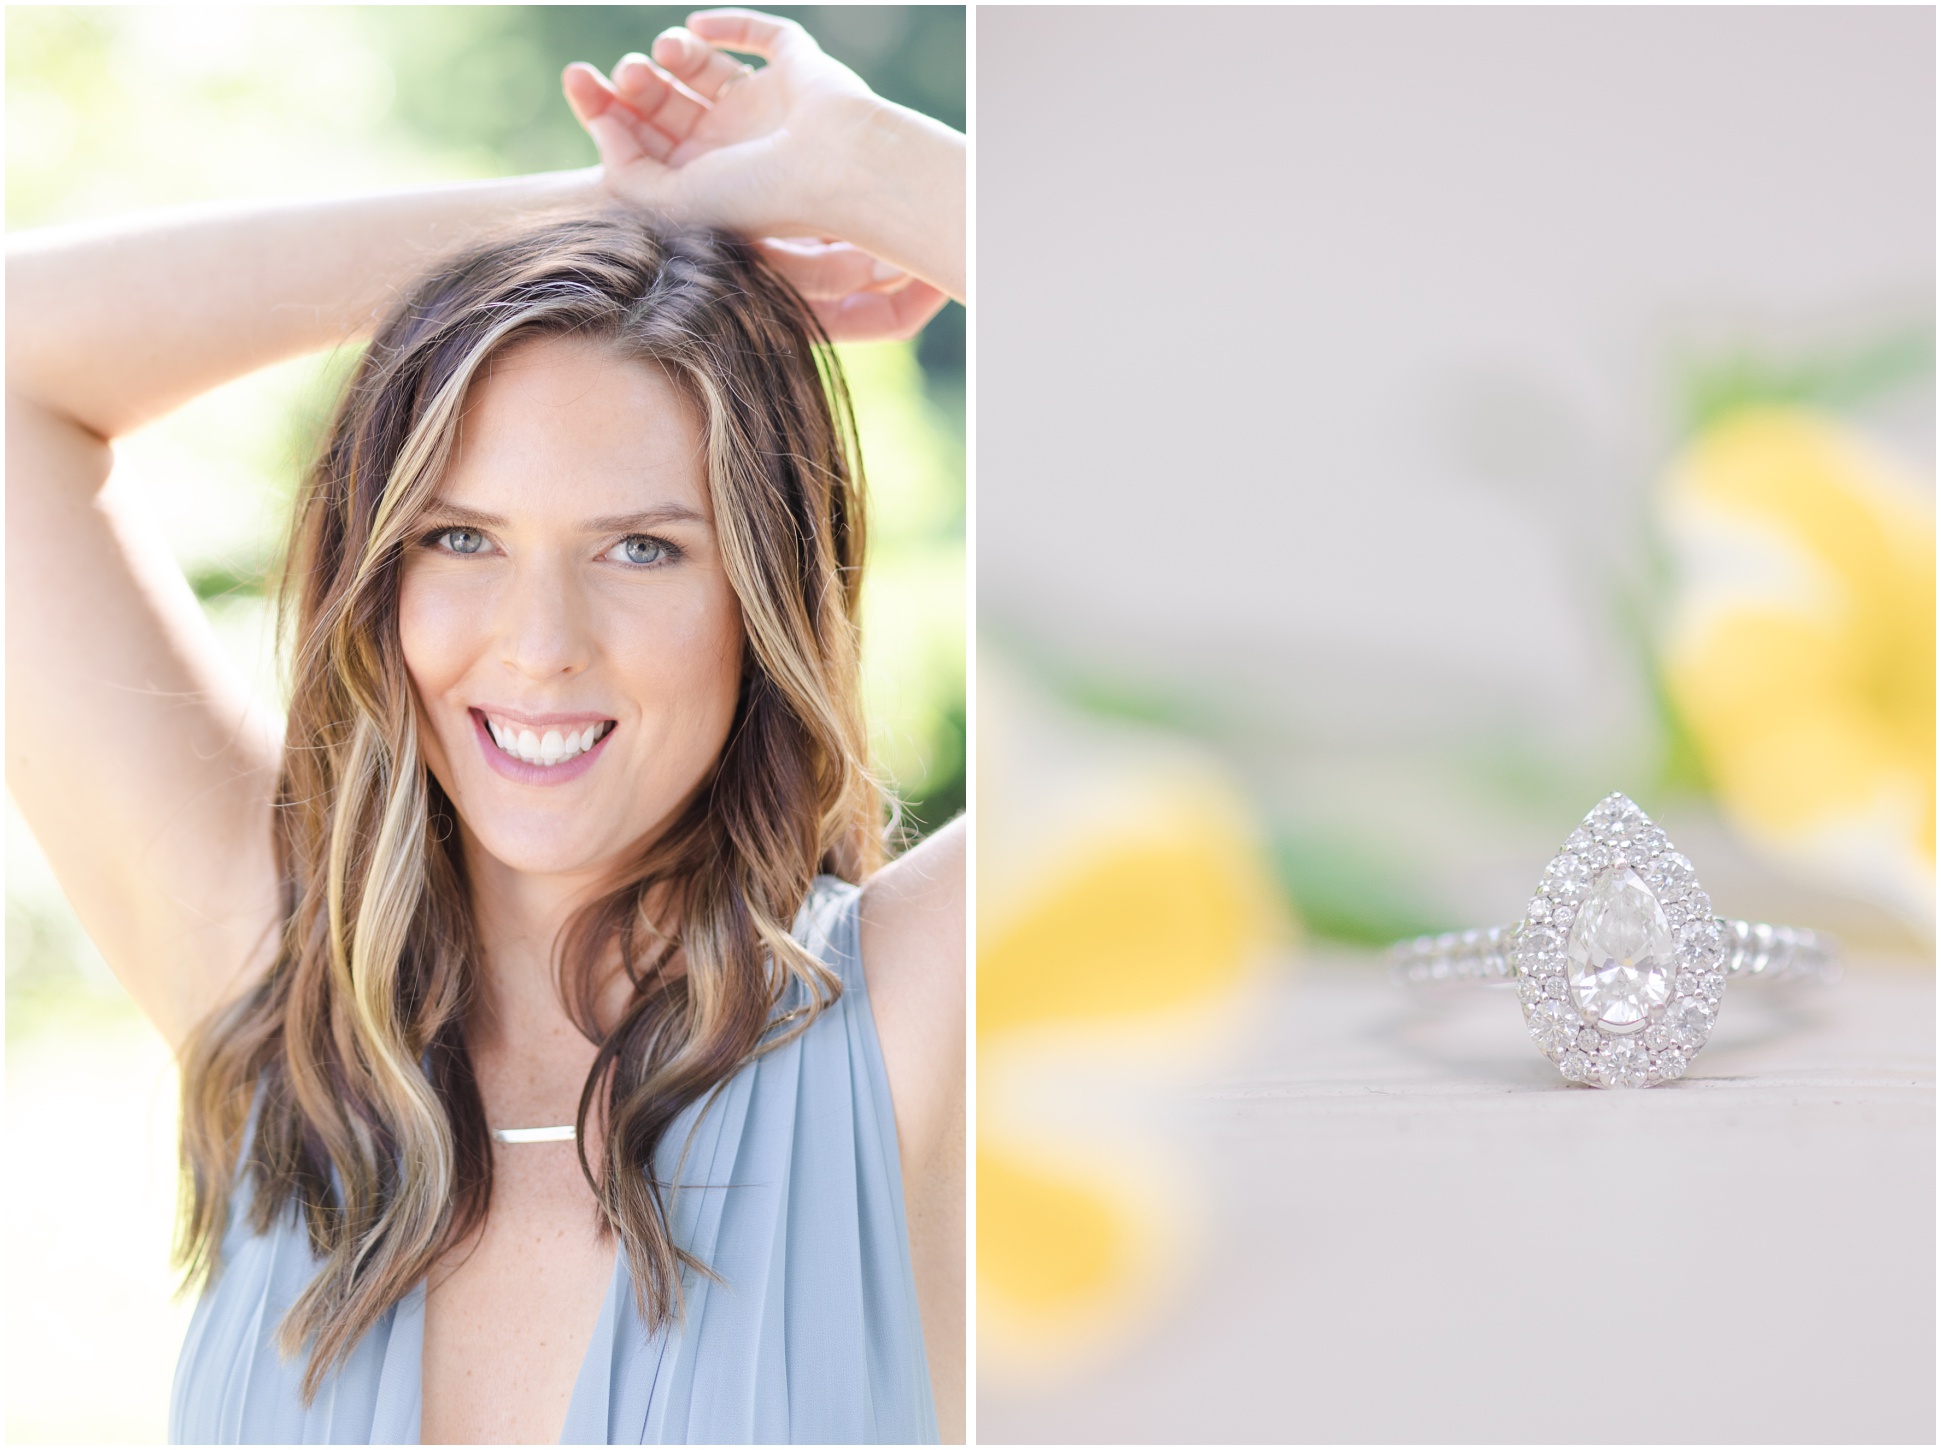 Left: A photograph of a woman smiling at the camera, wearing a baby blue chiffon dress with her hands ontop her head. Right: Teardrop shaped diamond engagement ring.